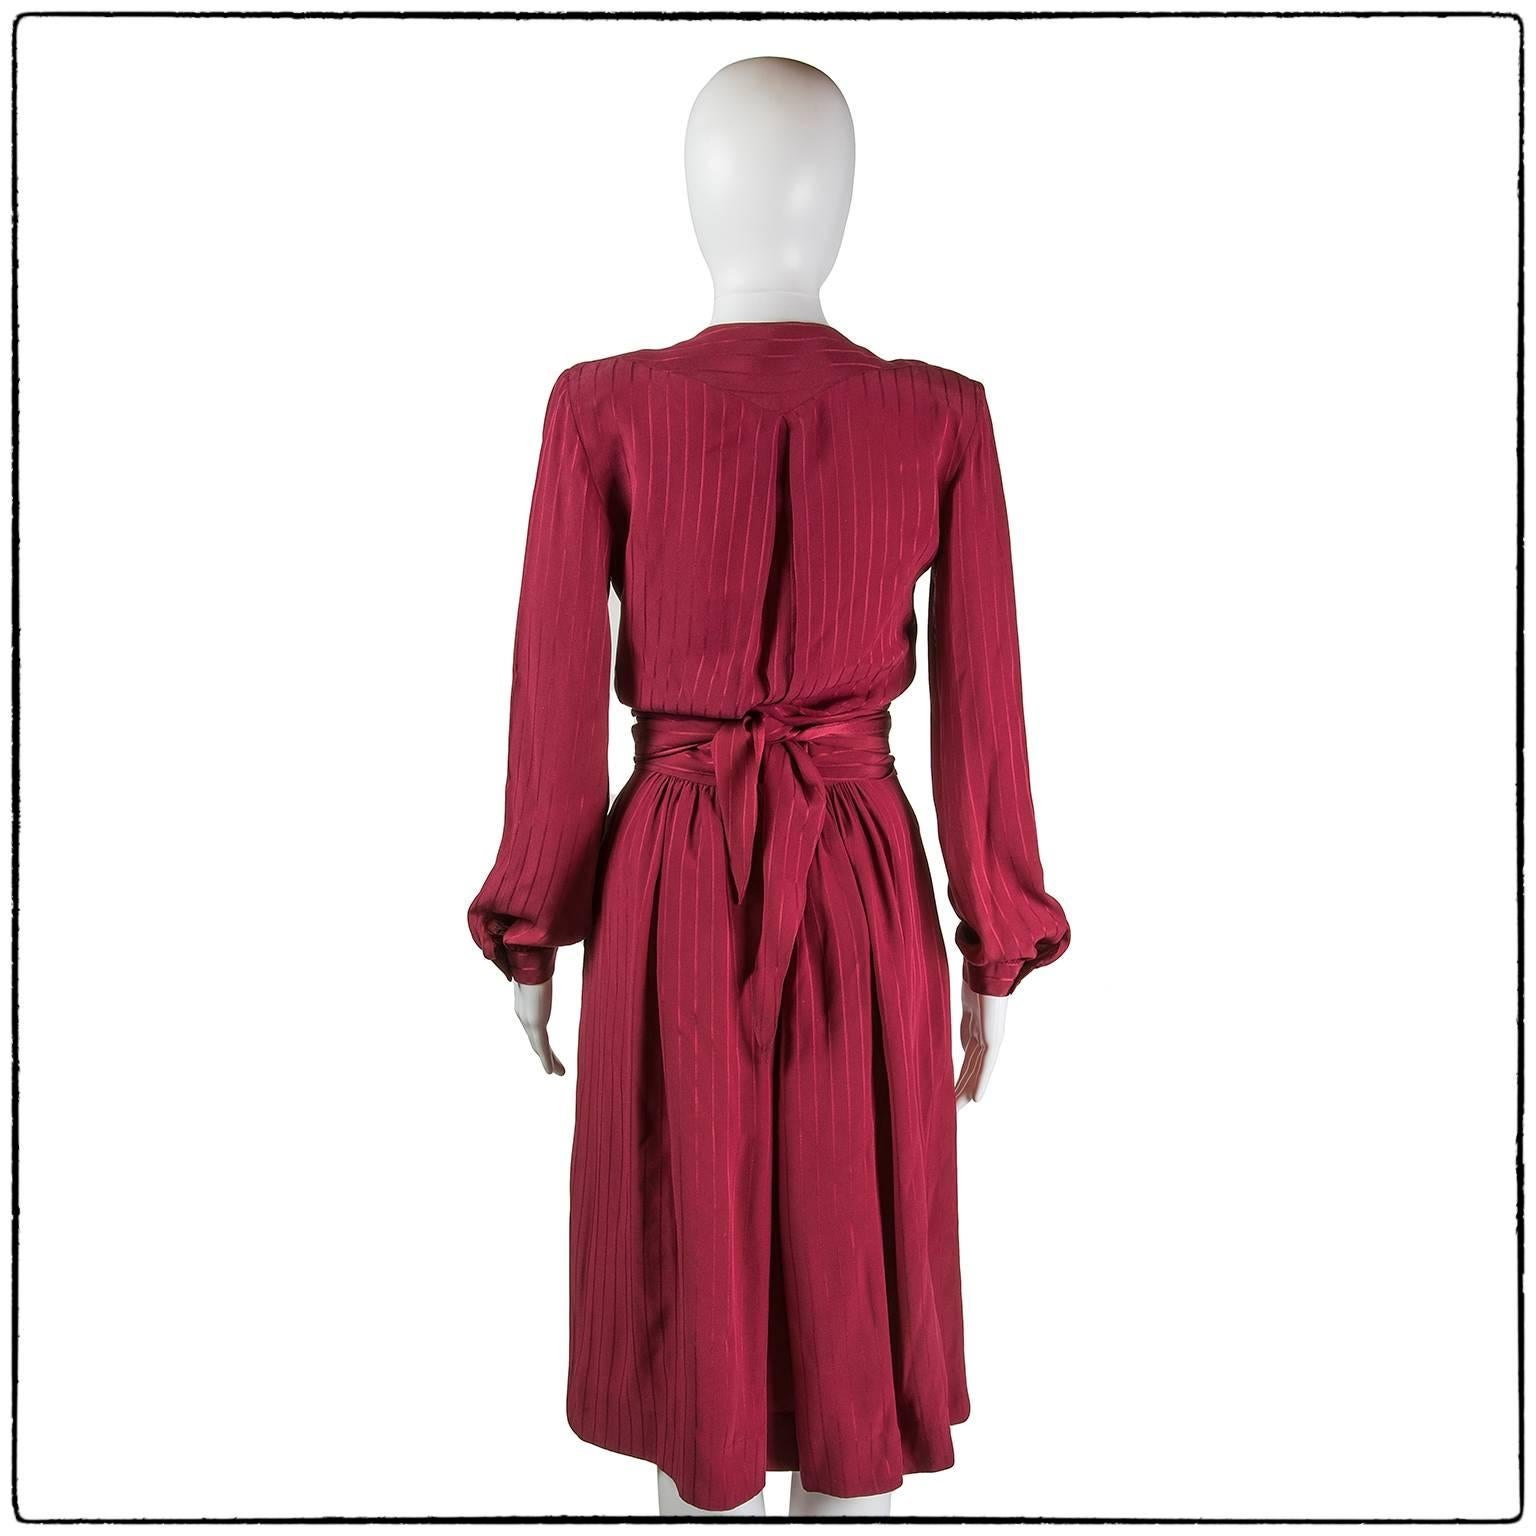 This beautiful Christian Dior two-piece ensemble, features a pleated skirt with two pockets and a seductive low-cut  blouse with a sash belt that can be tie as you prefer

Mark: Christian Dior
Material: silk

Size: 42 it, 8 UK, 6 US

Condition: Good